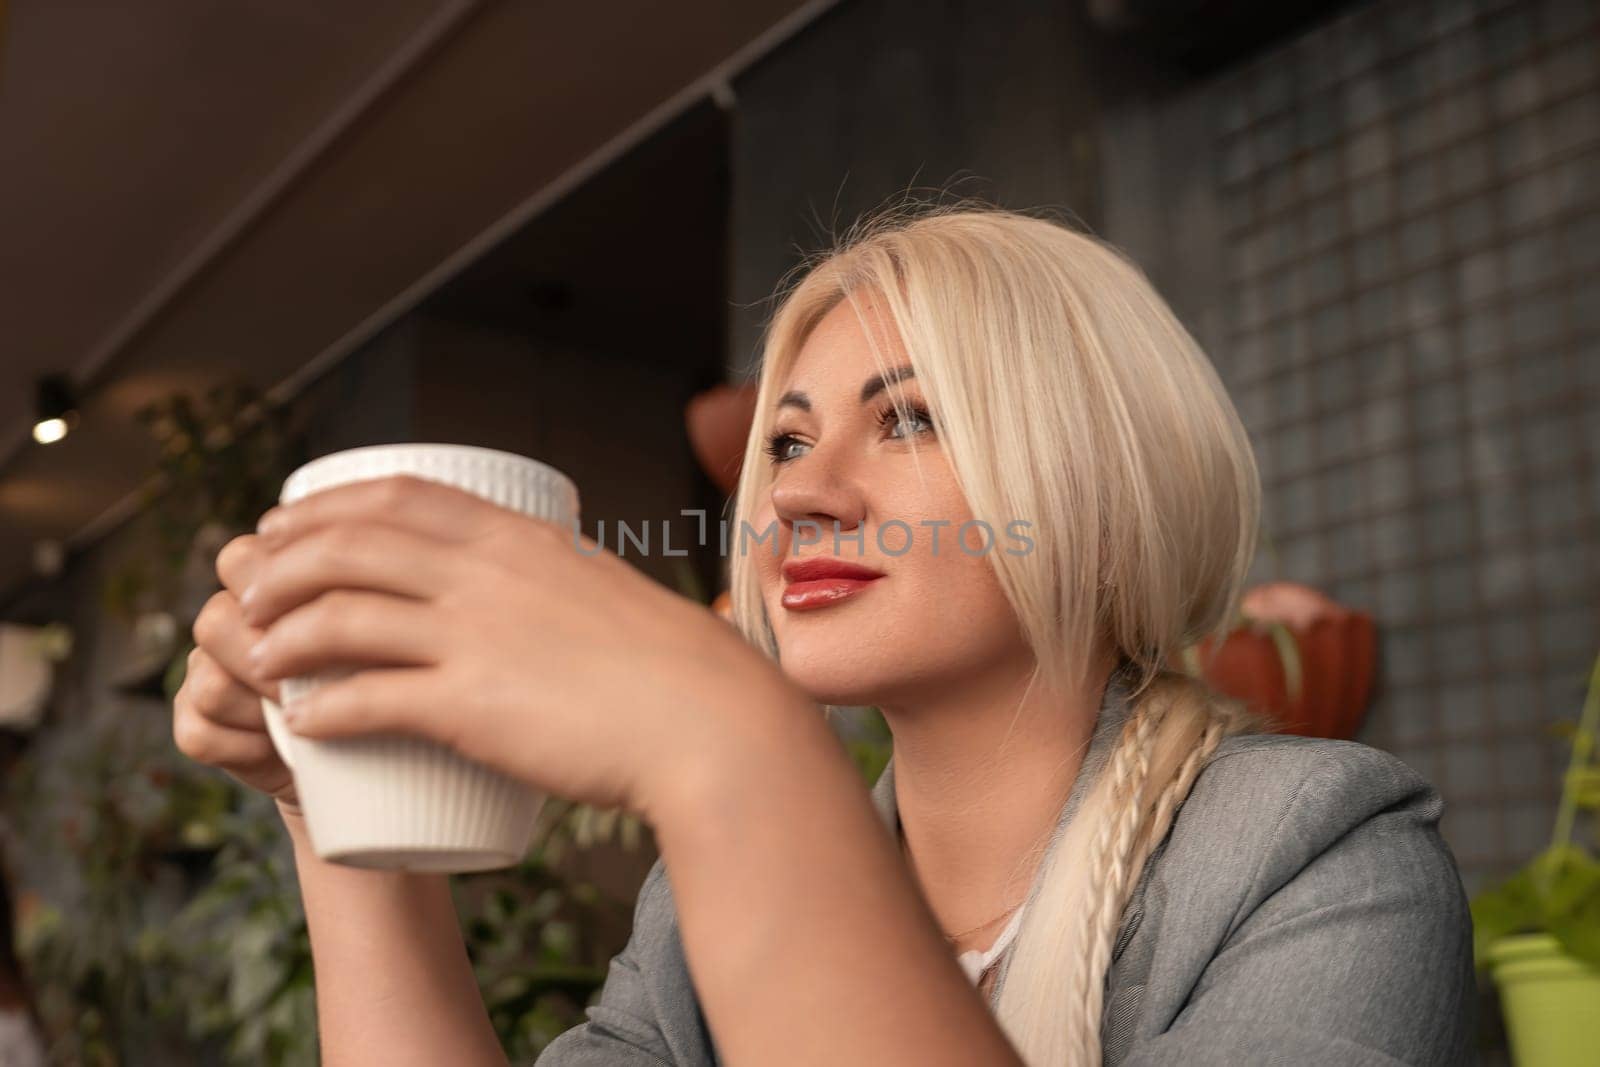 A blonde woman is holding a white coffee cup and looking at something. She is wearing a blue jacket and has red lipstick